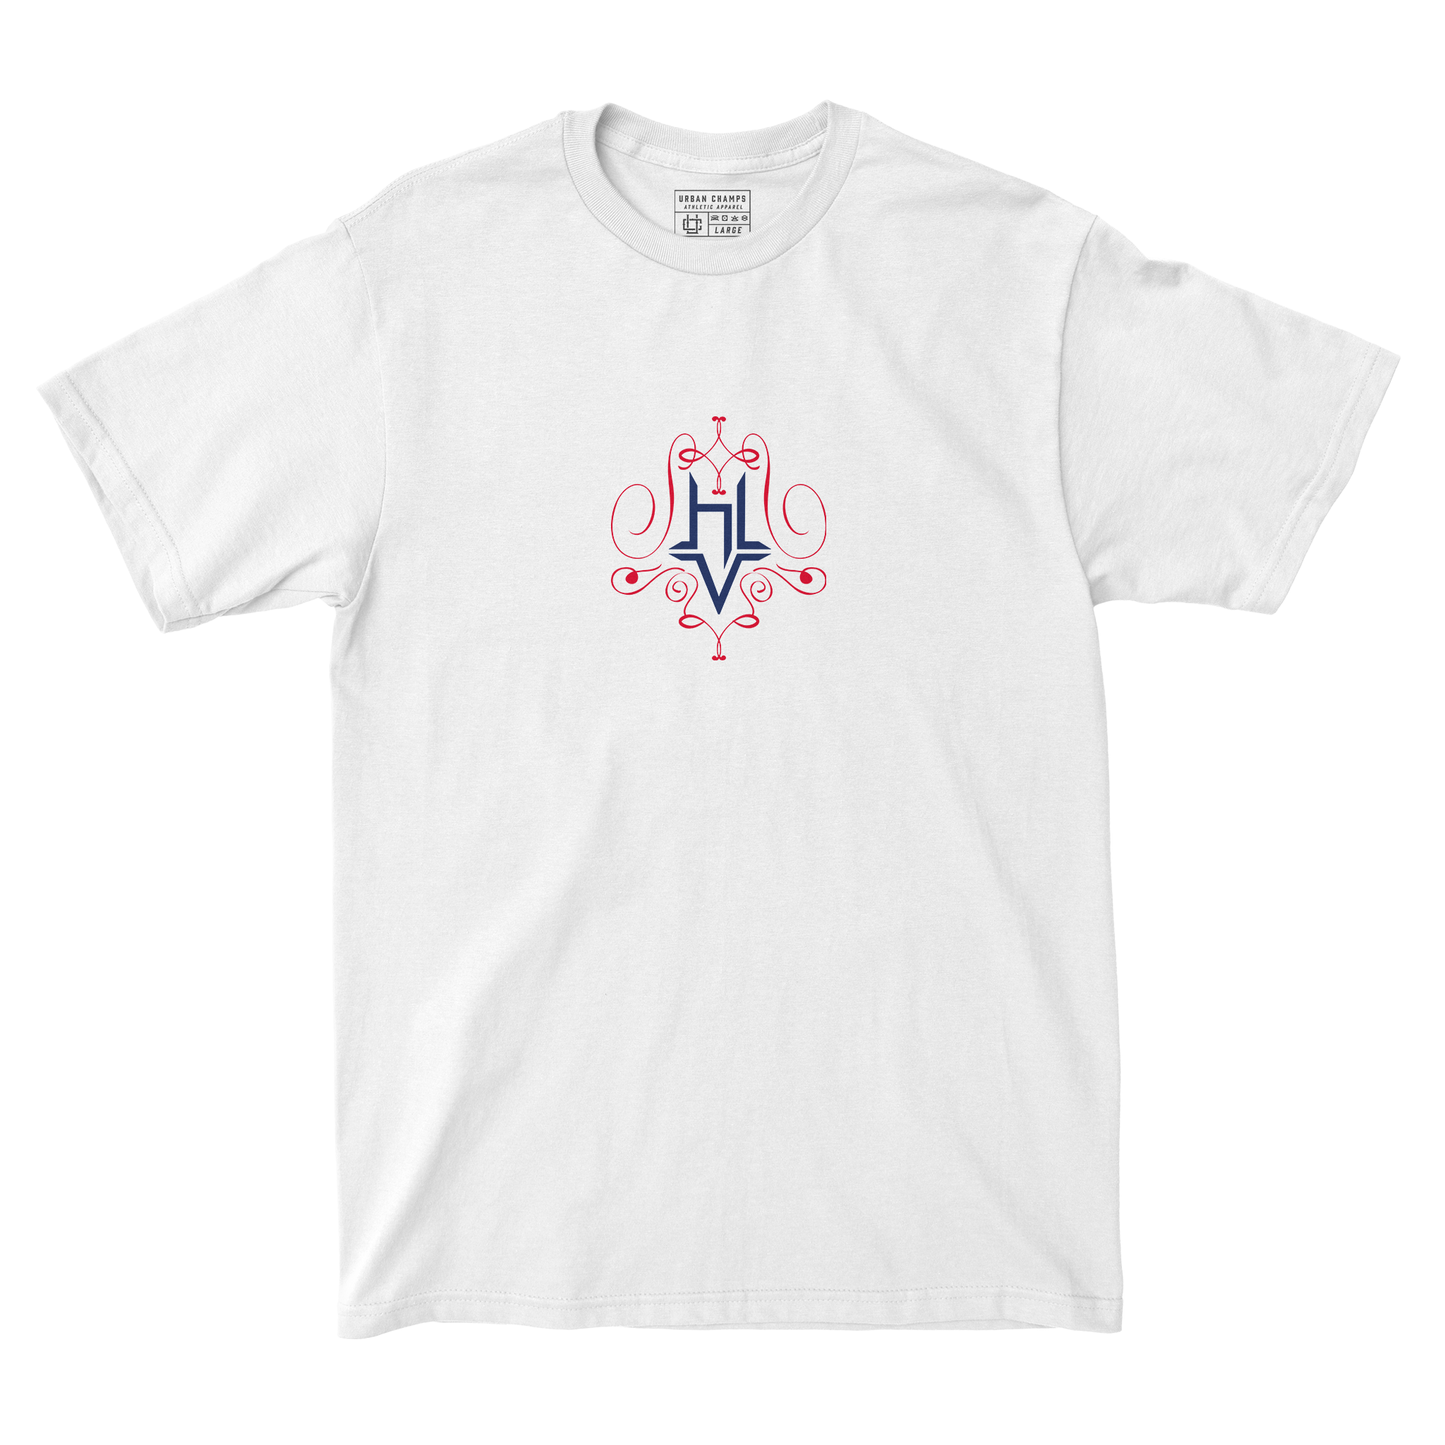 EXCLUSIVE RELEASE: Hailey Van Lith - Red White and Blue Script Logo Tee